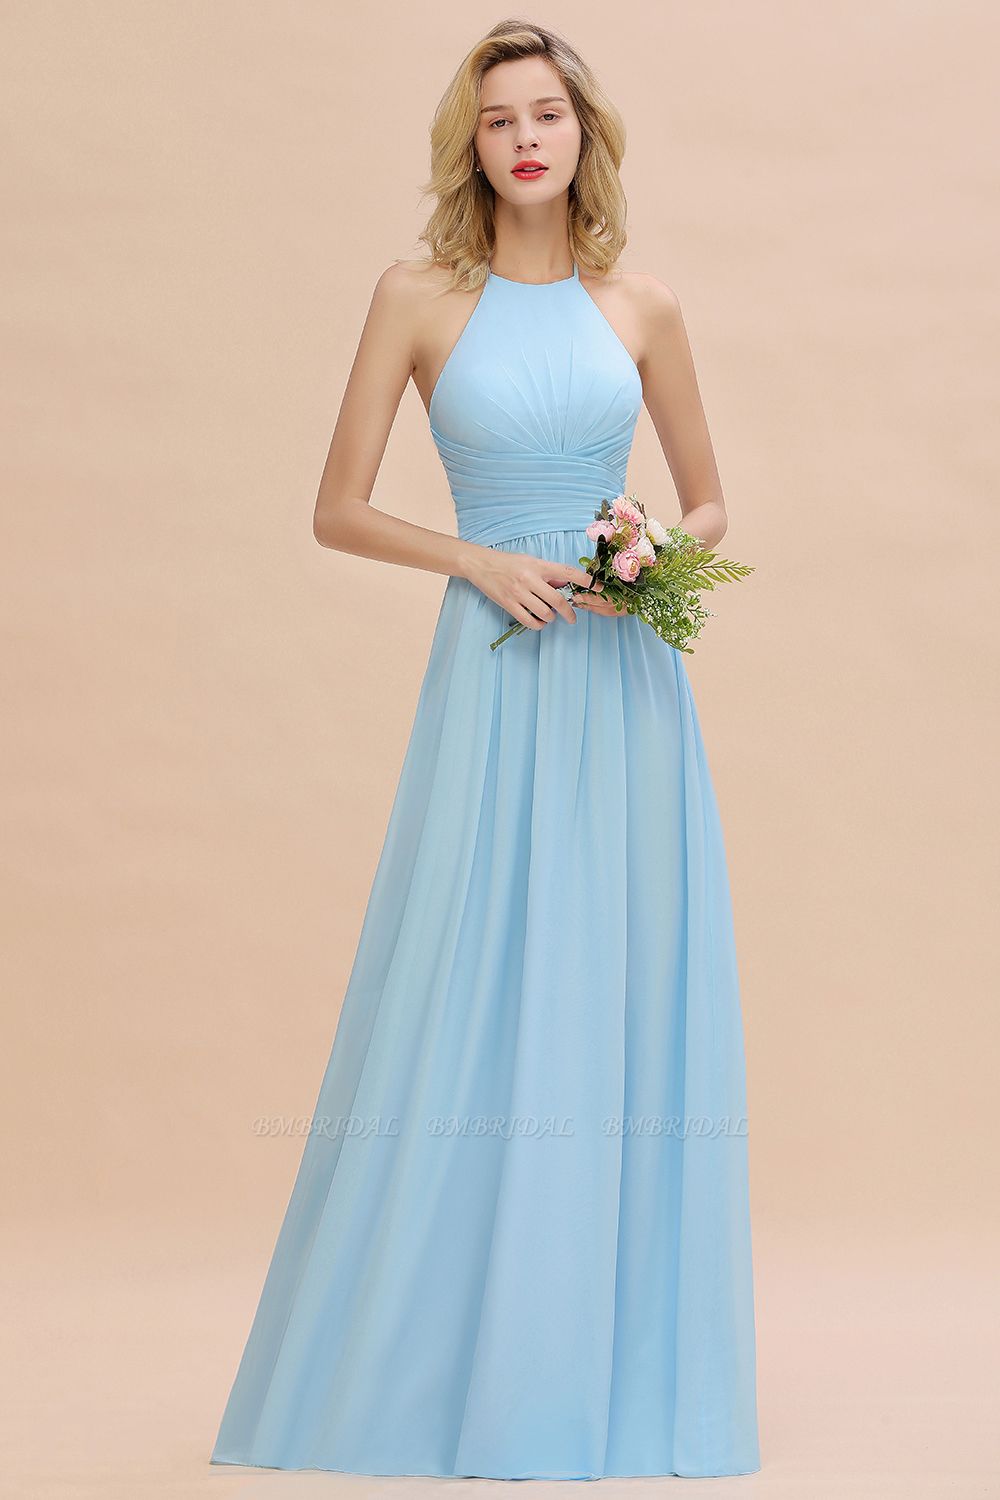 BMbridal Glamorous Halter Backless Long Affordable Bridesmaid Dresses with Ruffle